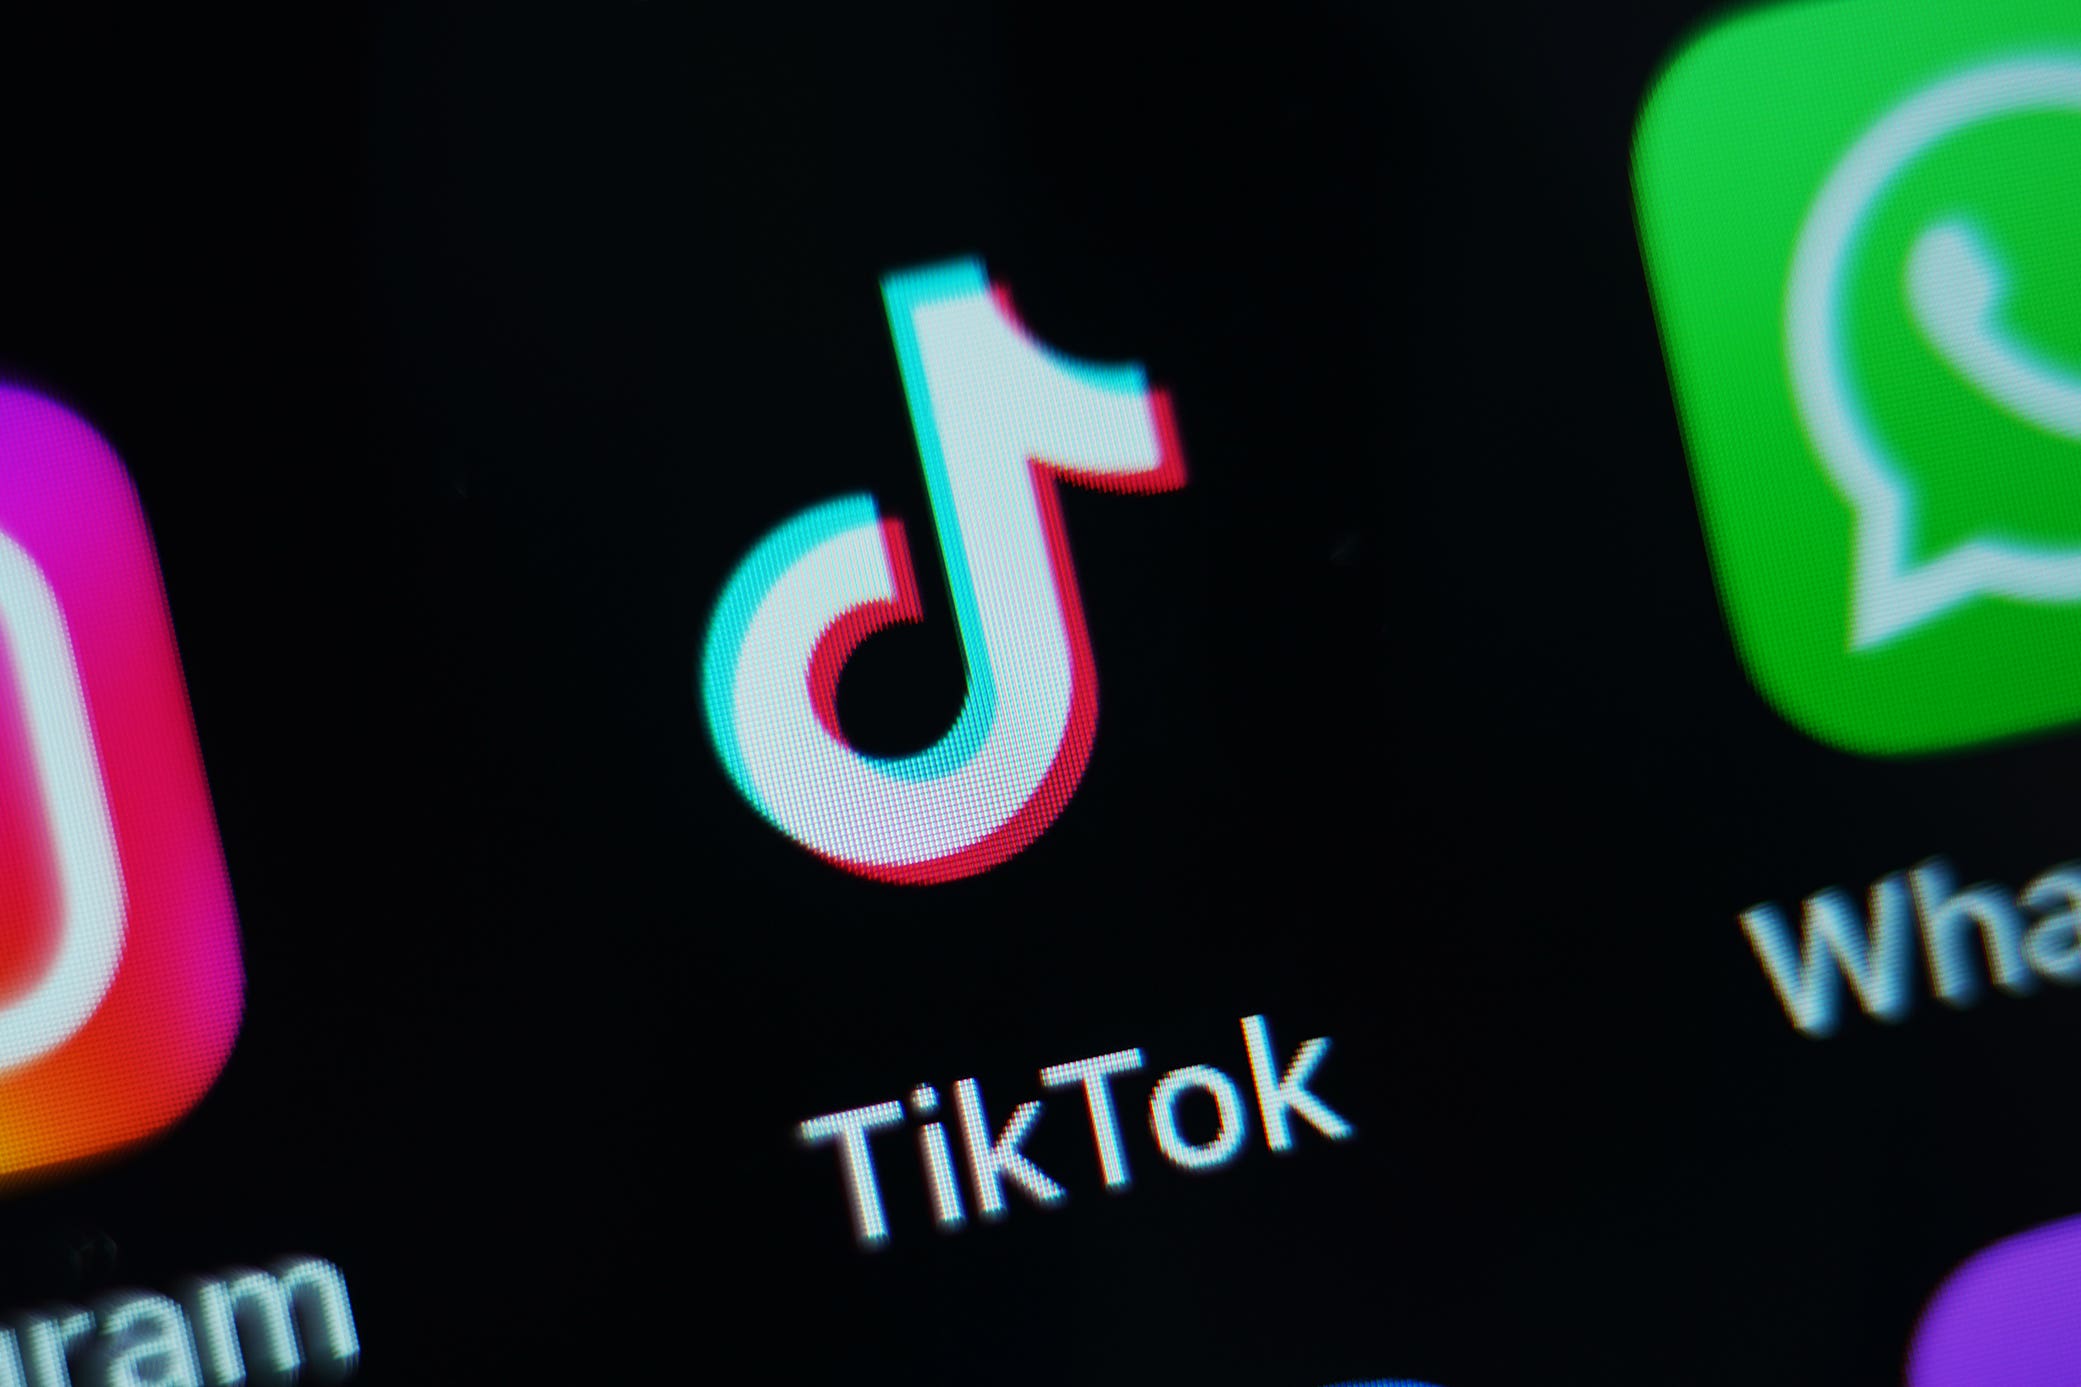 TikTok was only in its infancy during the last UK general election in 2019